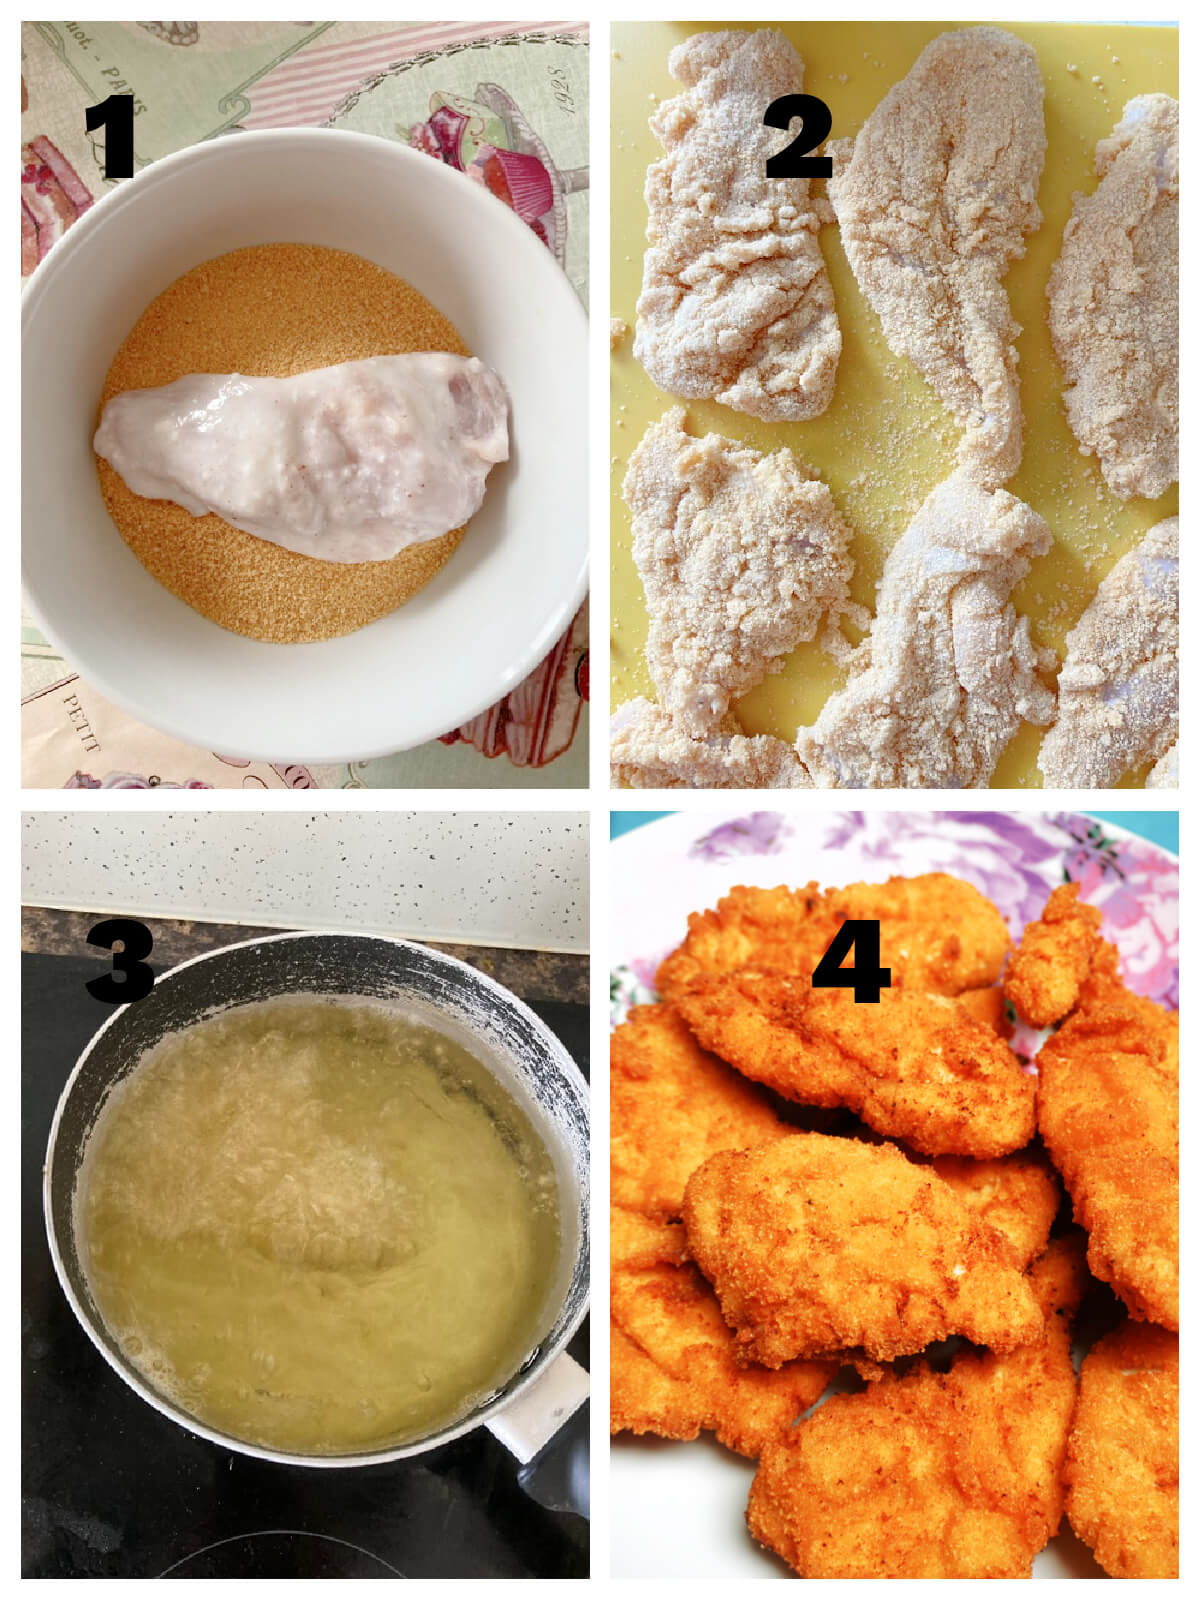 Collage of 4 photos to show how to fry coated chicken.